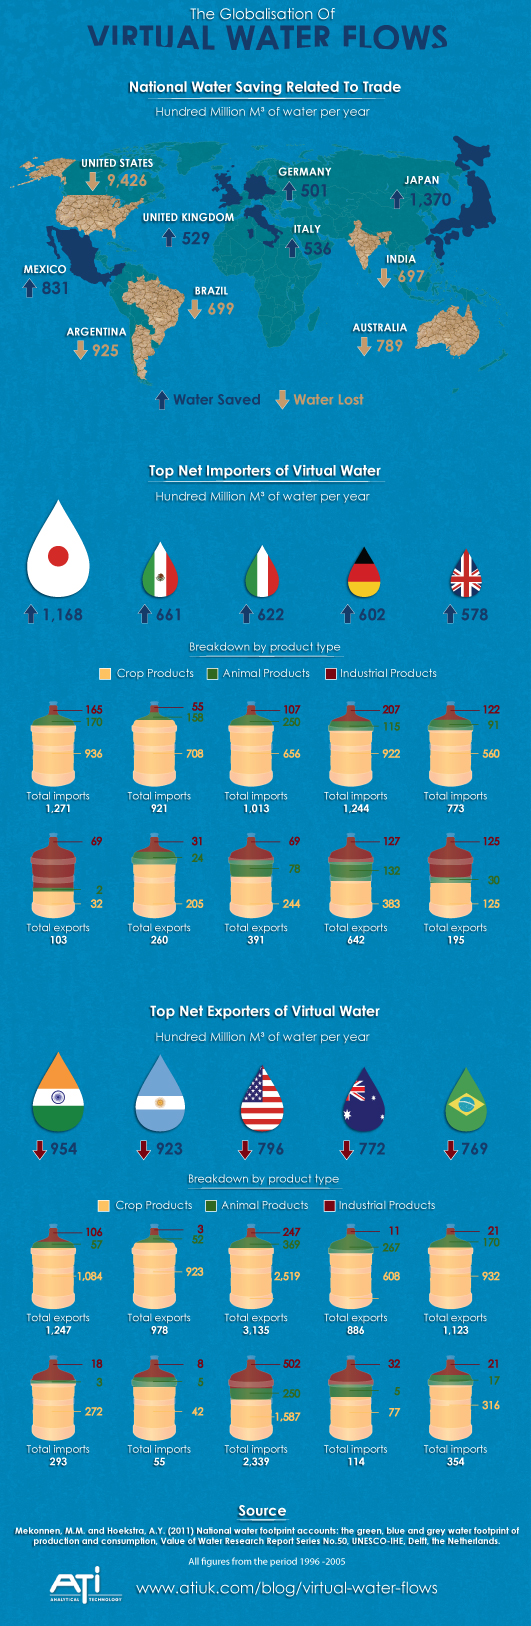 Infographic: The Globalisation of Virtual Water Flows (created by ATi)